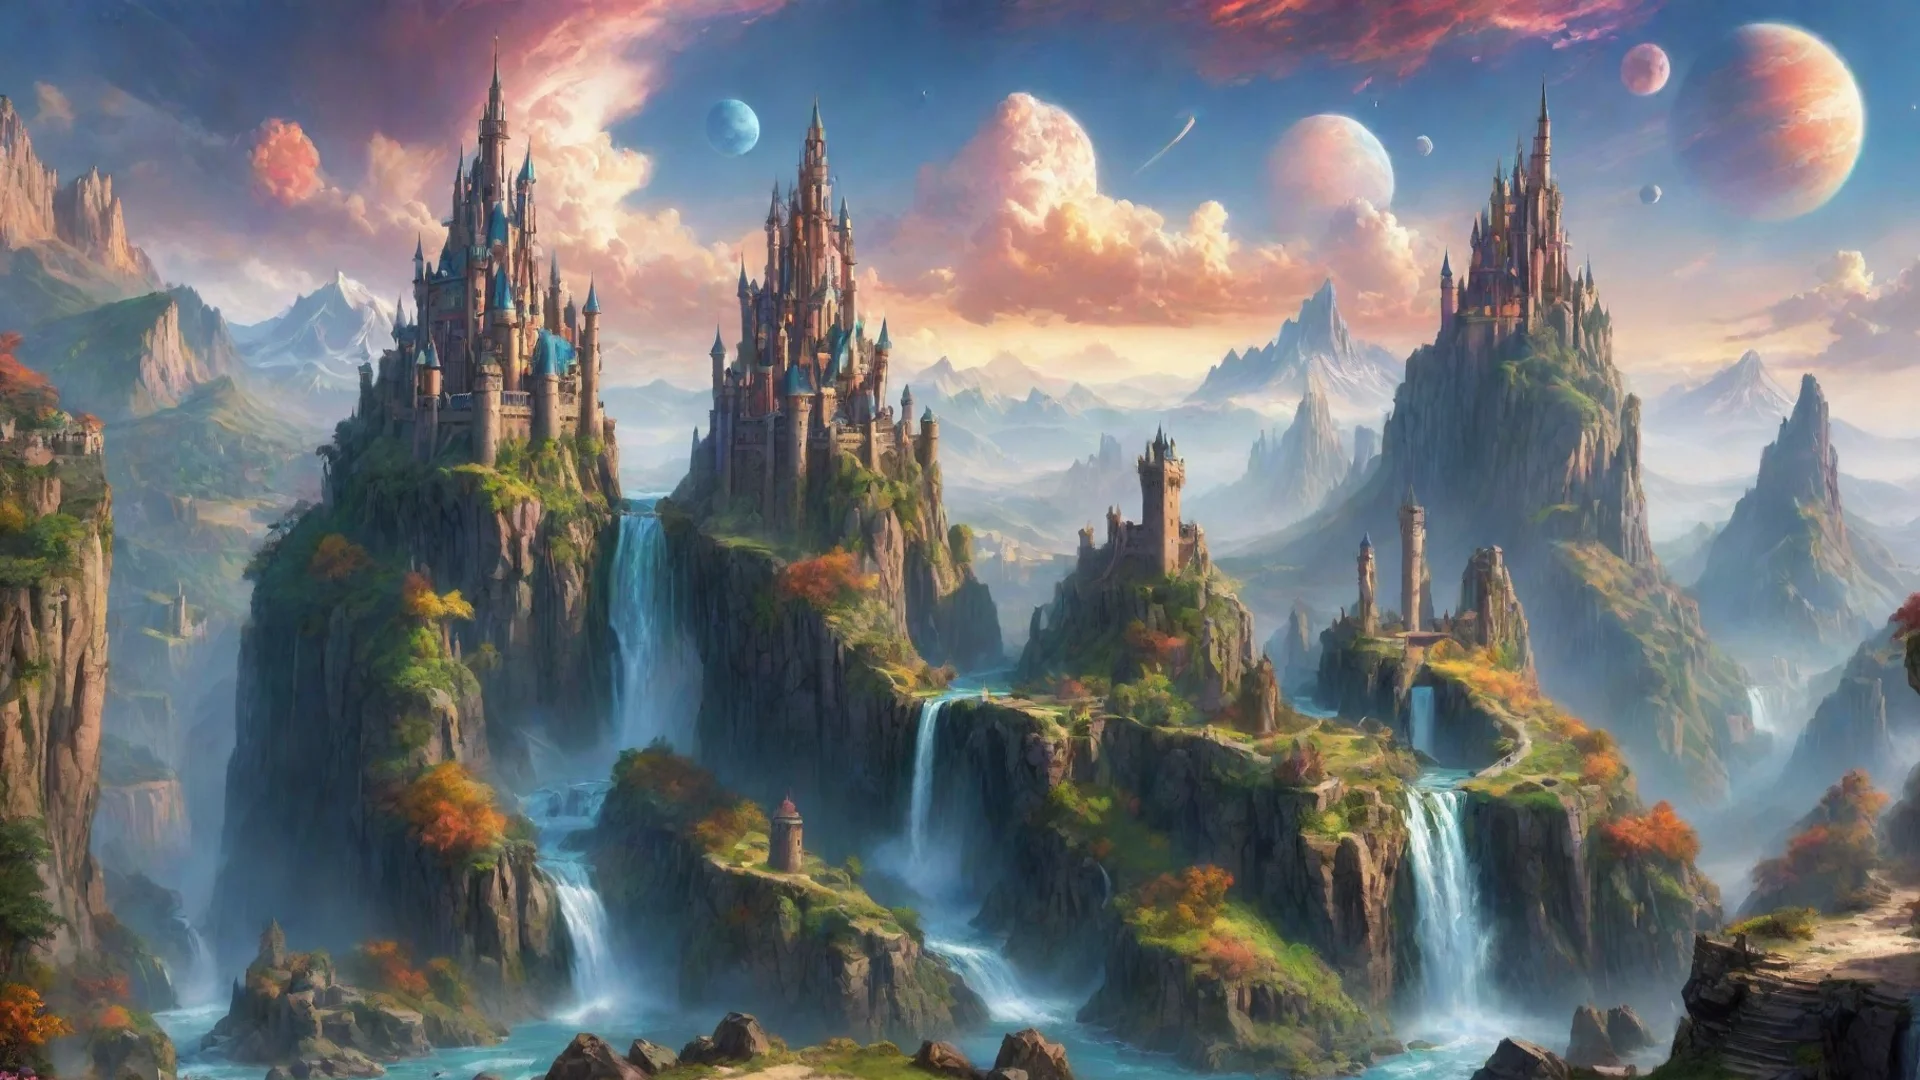 amazing scenery hd detailed colorful planets in sky realistic castles spiral towers high cliffs waterfalls beautiful wonderful aesthetic wide